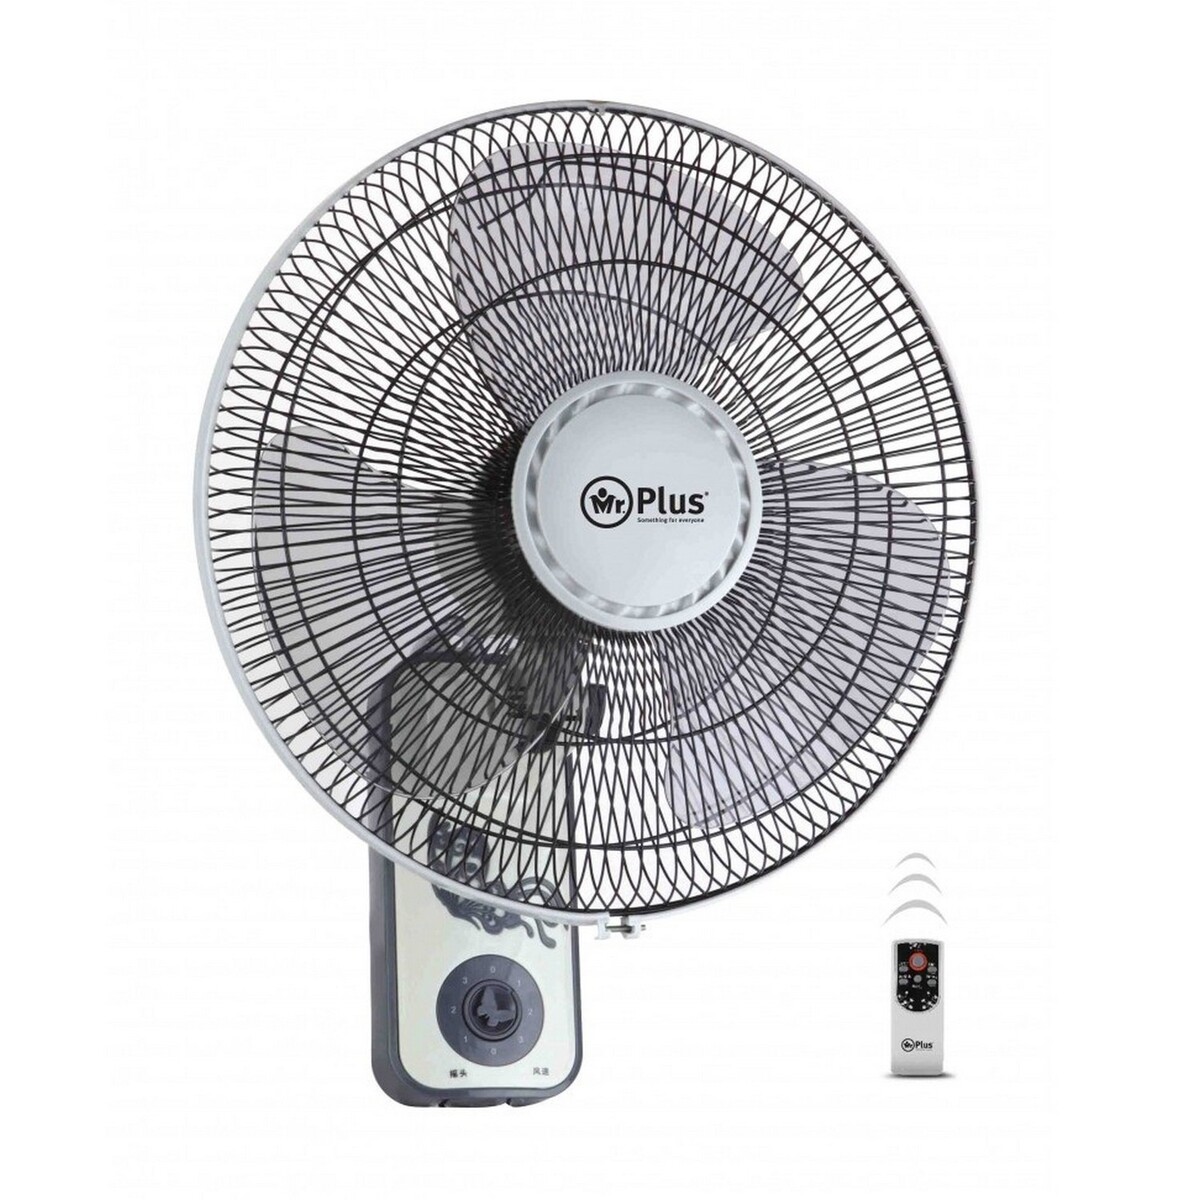 Mr Light Wall Fan 3415 With remote